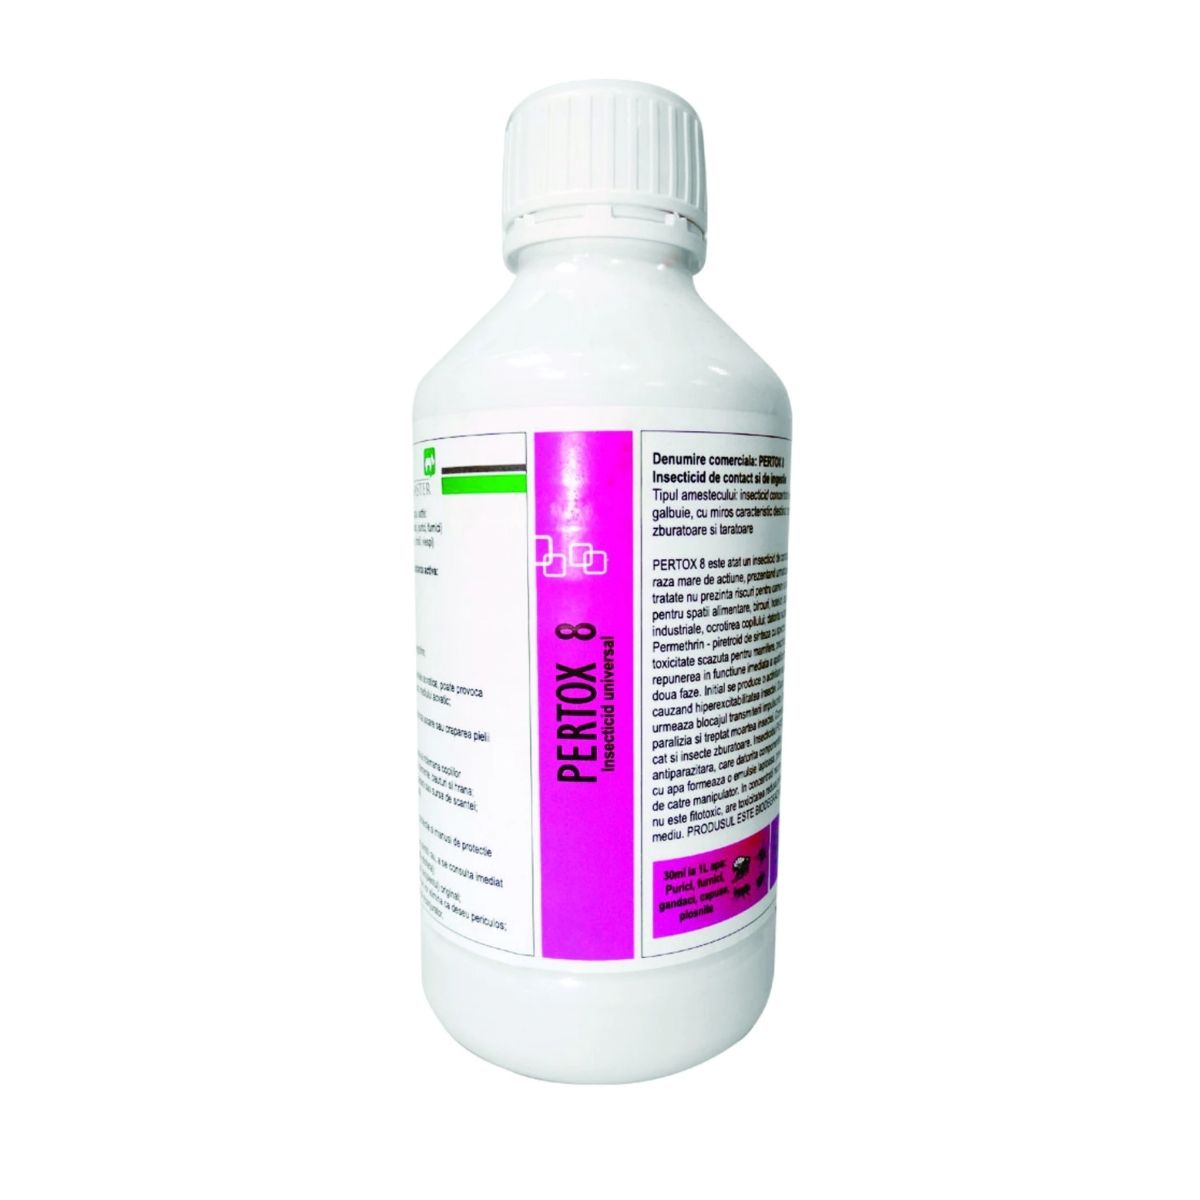 Insecticide - Insecticid concentrat PERTOX 8 FORTE 1 L ,Pestmaster, hectarul.ro